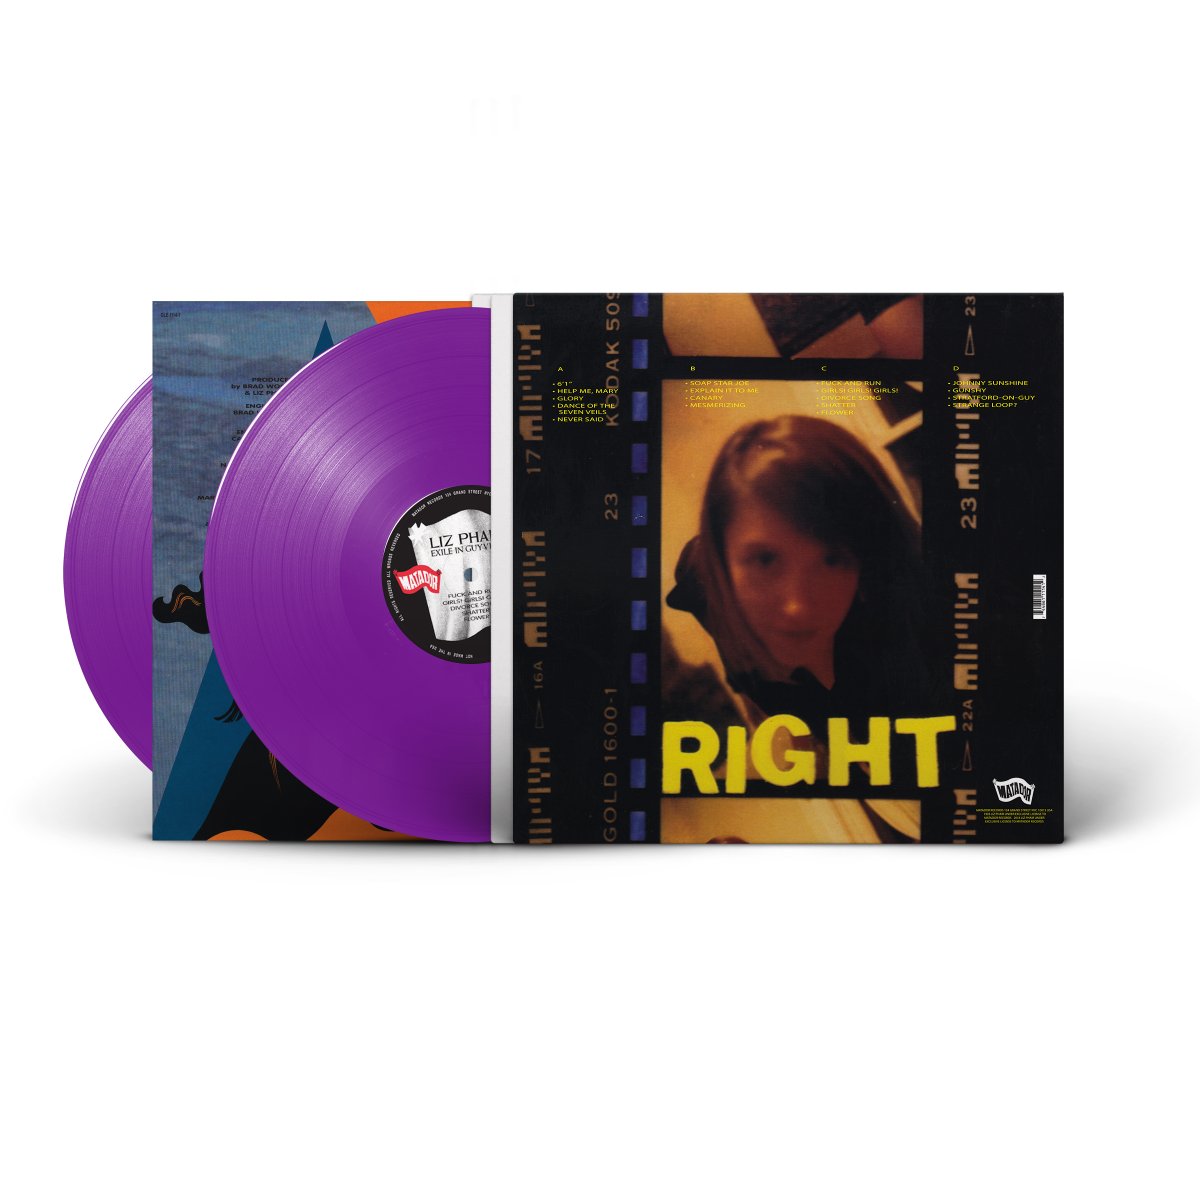 Out today: Liz Phair's debut album 'Exile in Guyville' on 30th anniversary purple vinyl, available at the Matador webstore and finer record stores everywhere: lizphair.ffm.to/exileinguyville

#MatadorRevisionistHistory
#LizPhair #ExileinGuyville